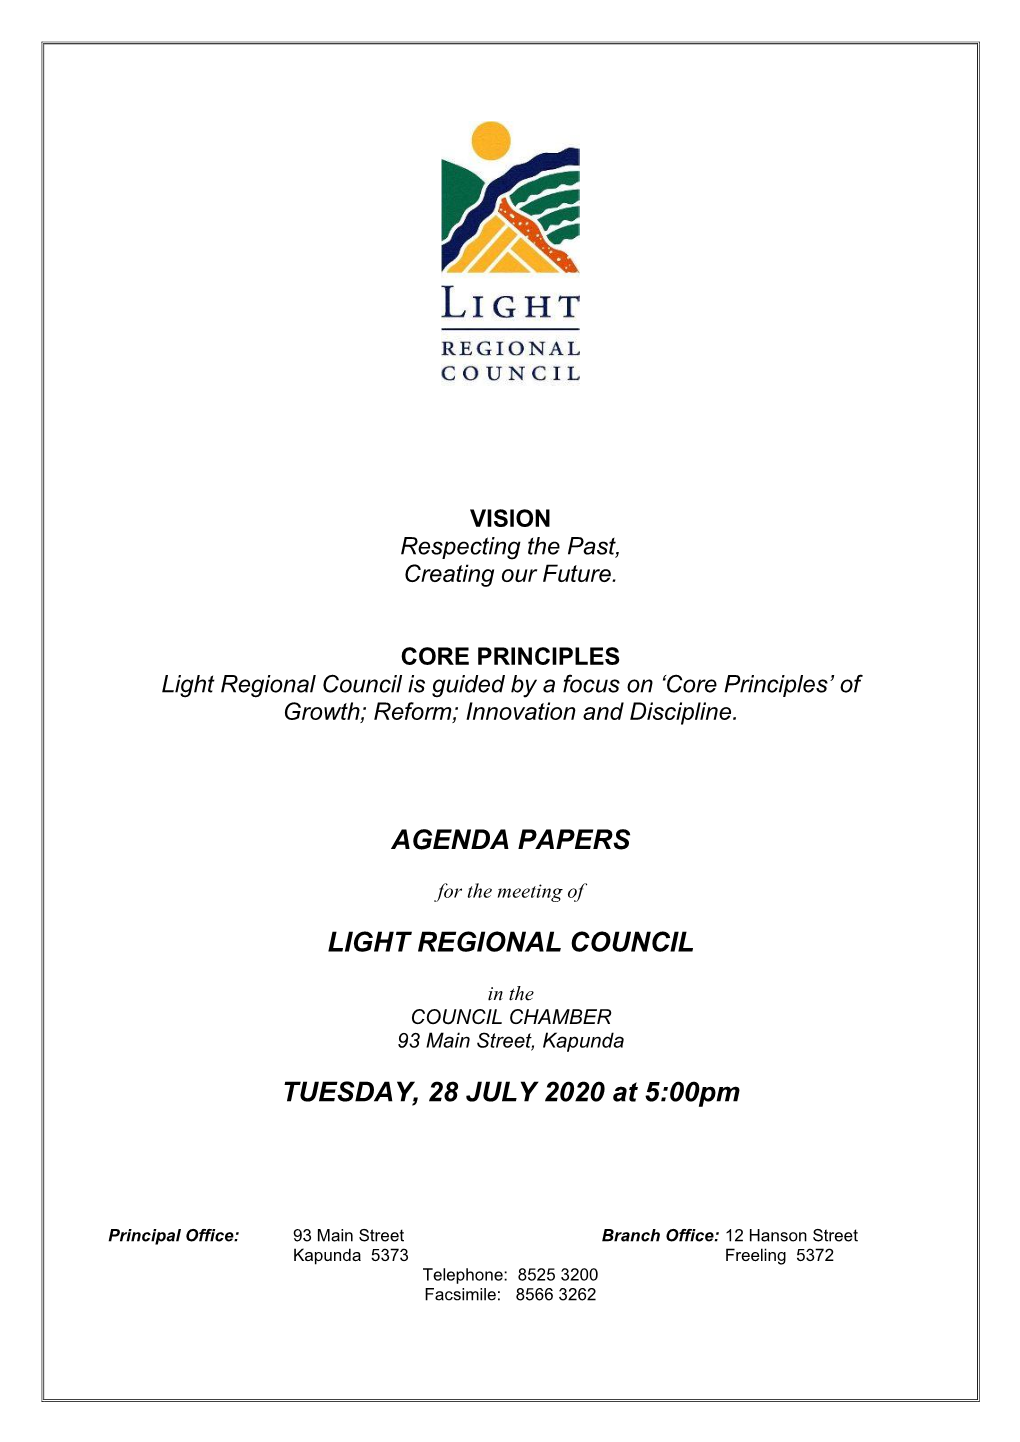 Agenda Papers Light Regional Council Tuesday, 28 July